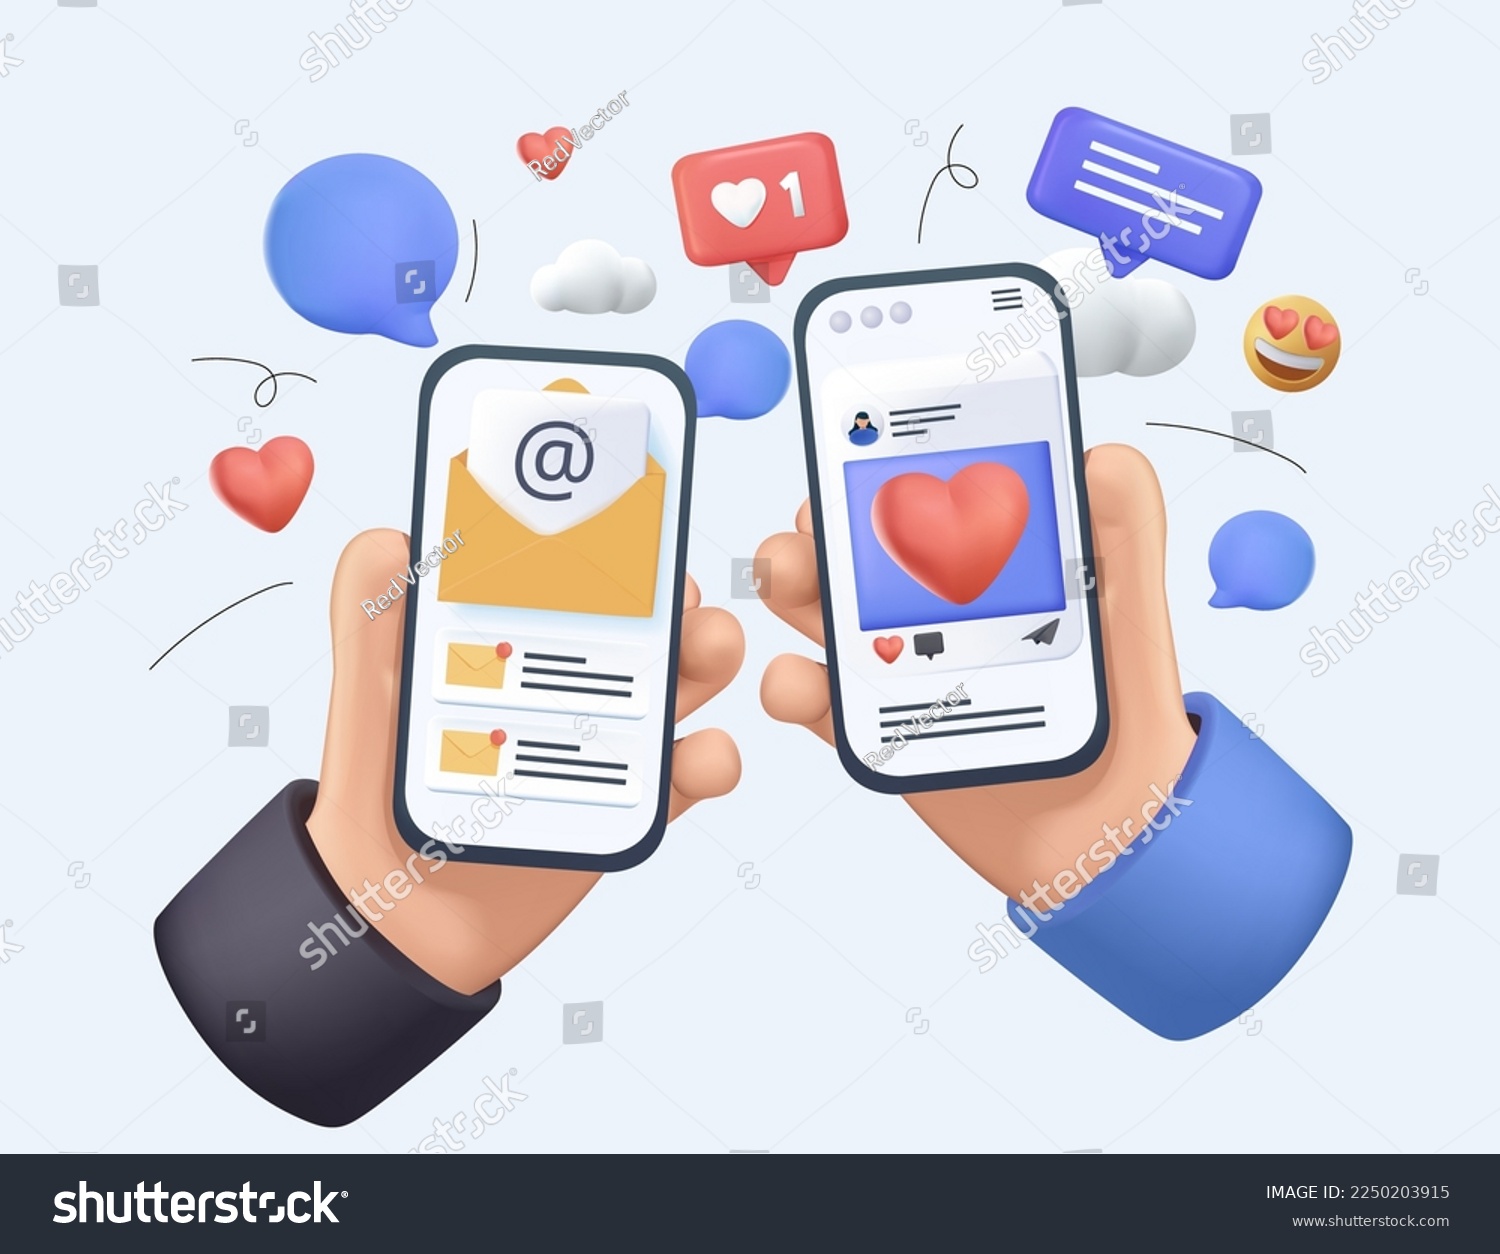 3D hands holding phone with message, icons and emoji. 3D Communication concept on white background. Social networking, SMM concept. Vector 3d render cartoon illustration website, banners, app design #2250203915